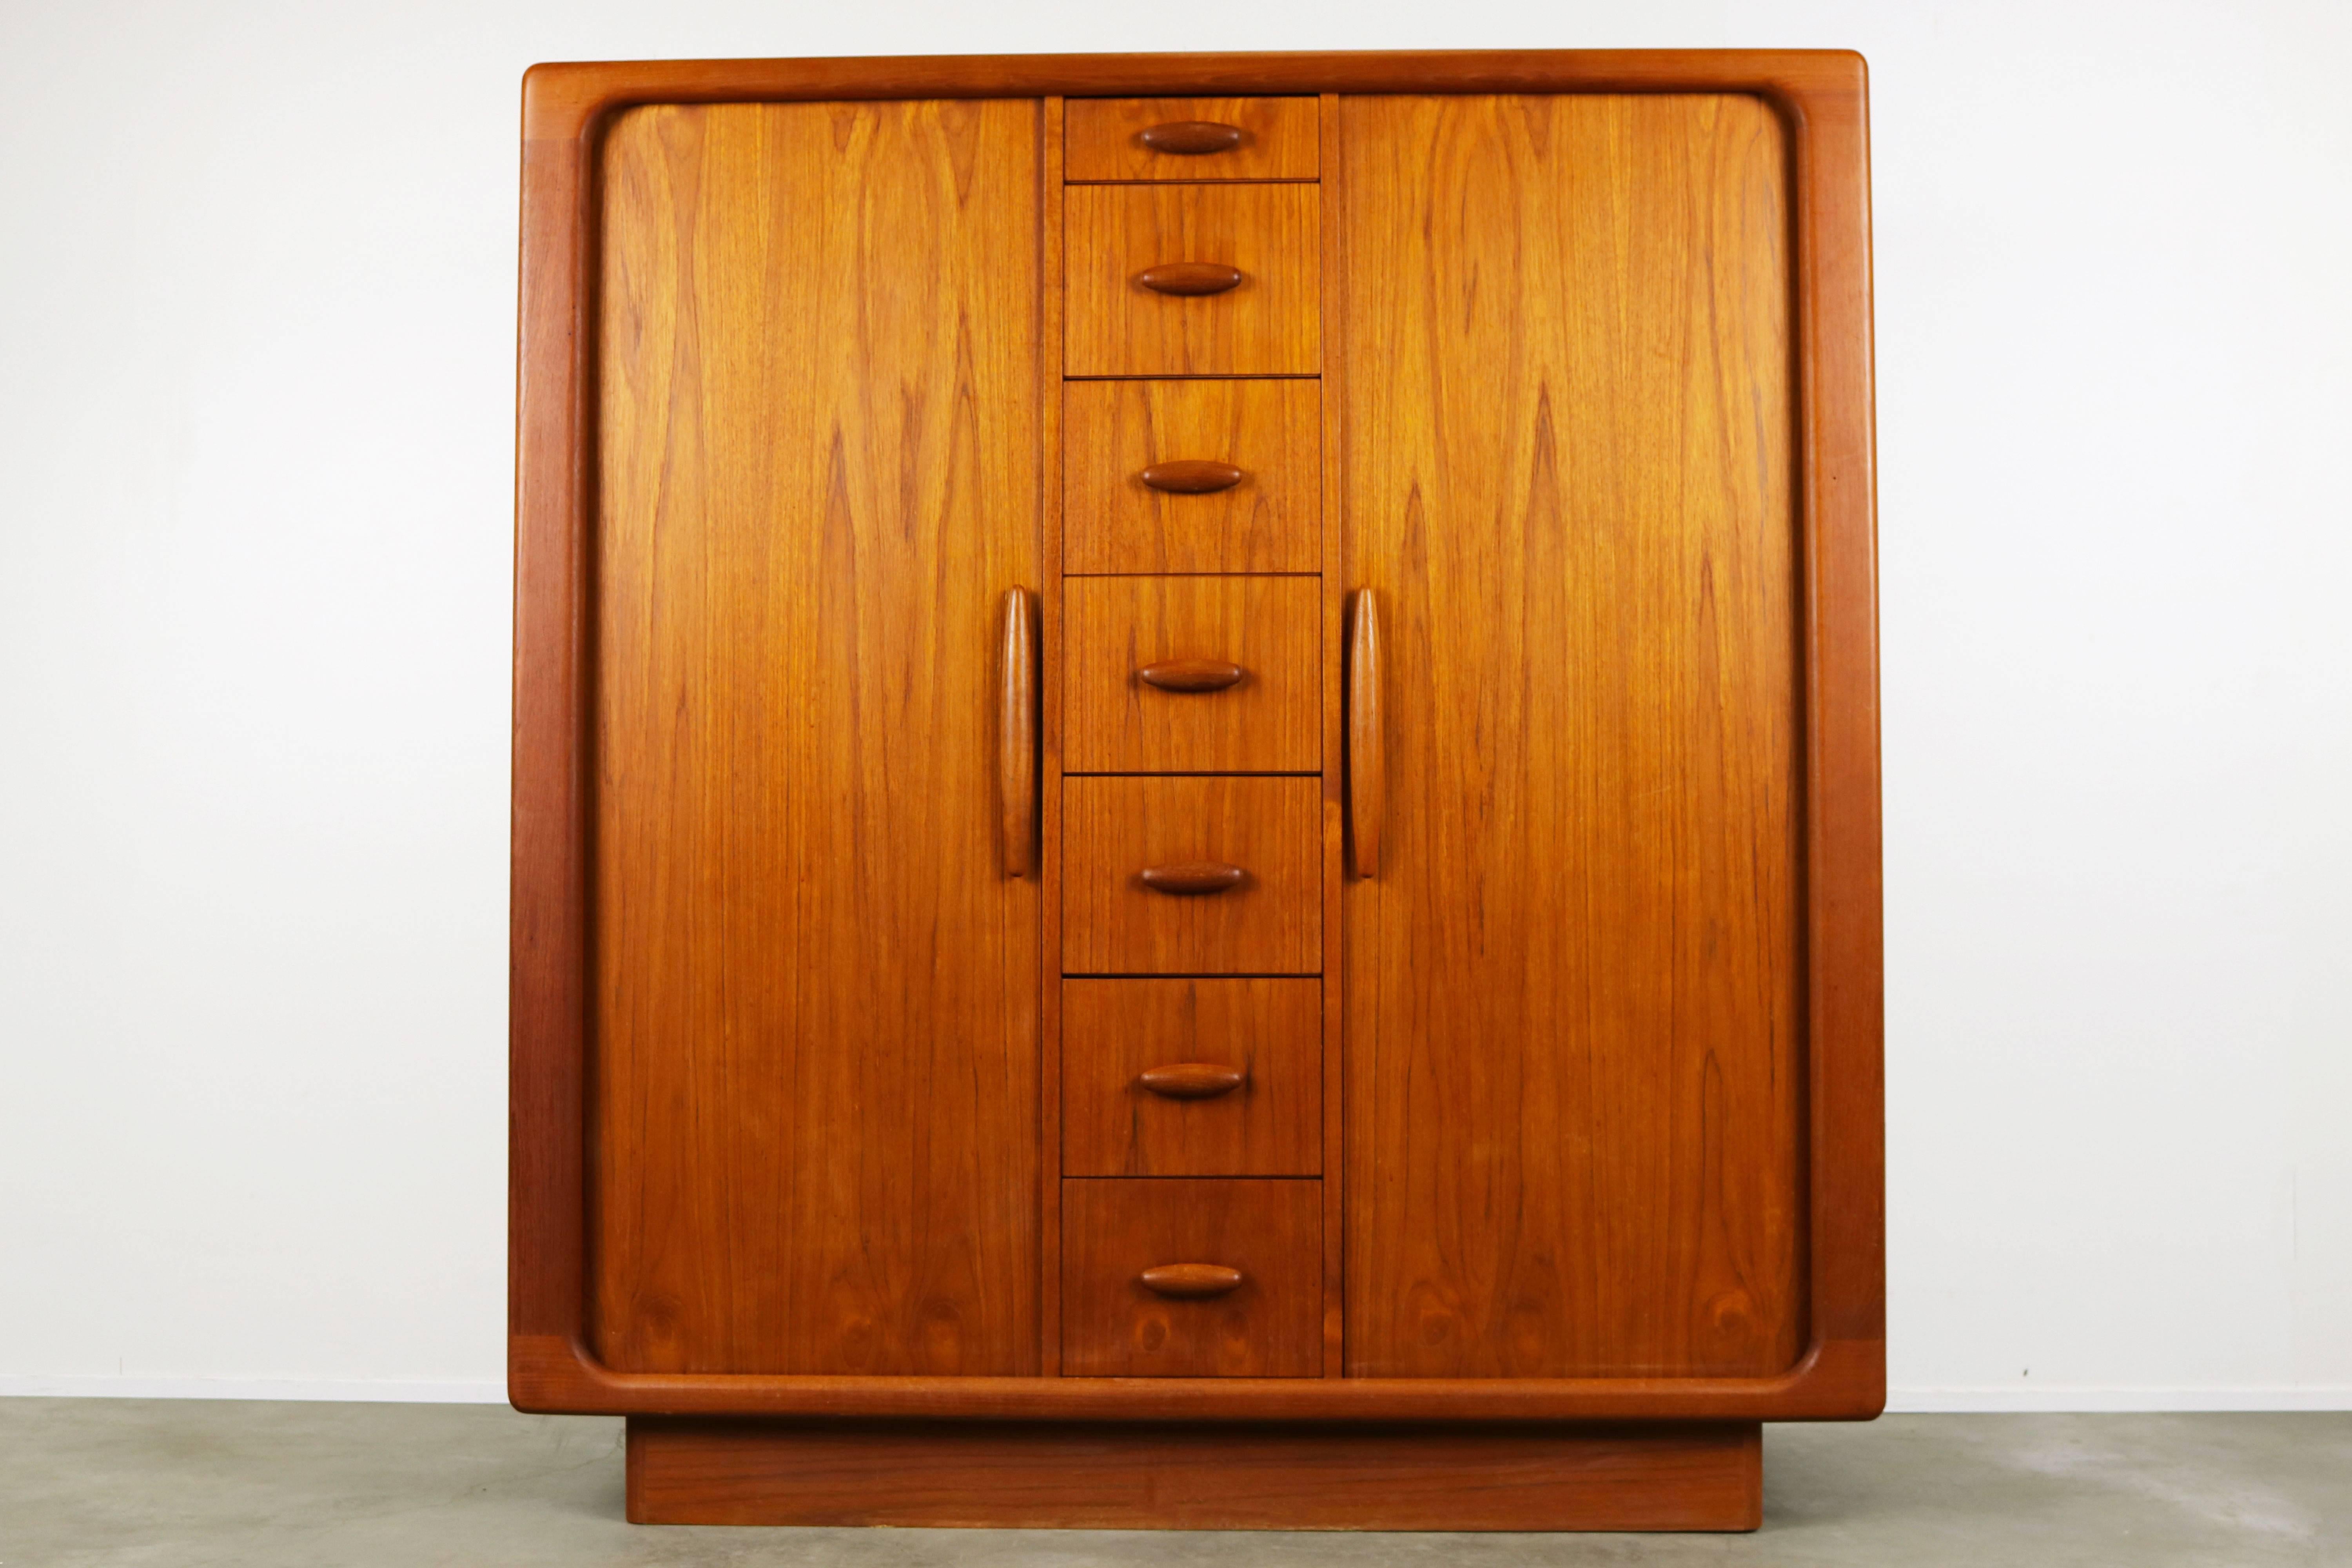 Stunning Danish cabinet, dresser or gentleman’s chest in sculpted teak designed and produced by Dyrlund, 1960.
Perfect for storing clothes and jewelry or office supplies and paperwork. Dyrlund is well-known for their high quality midcentury